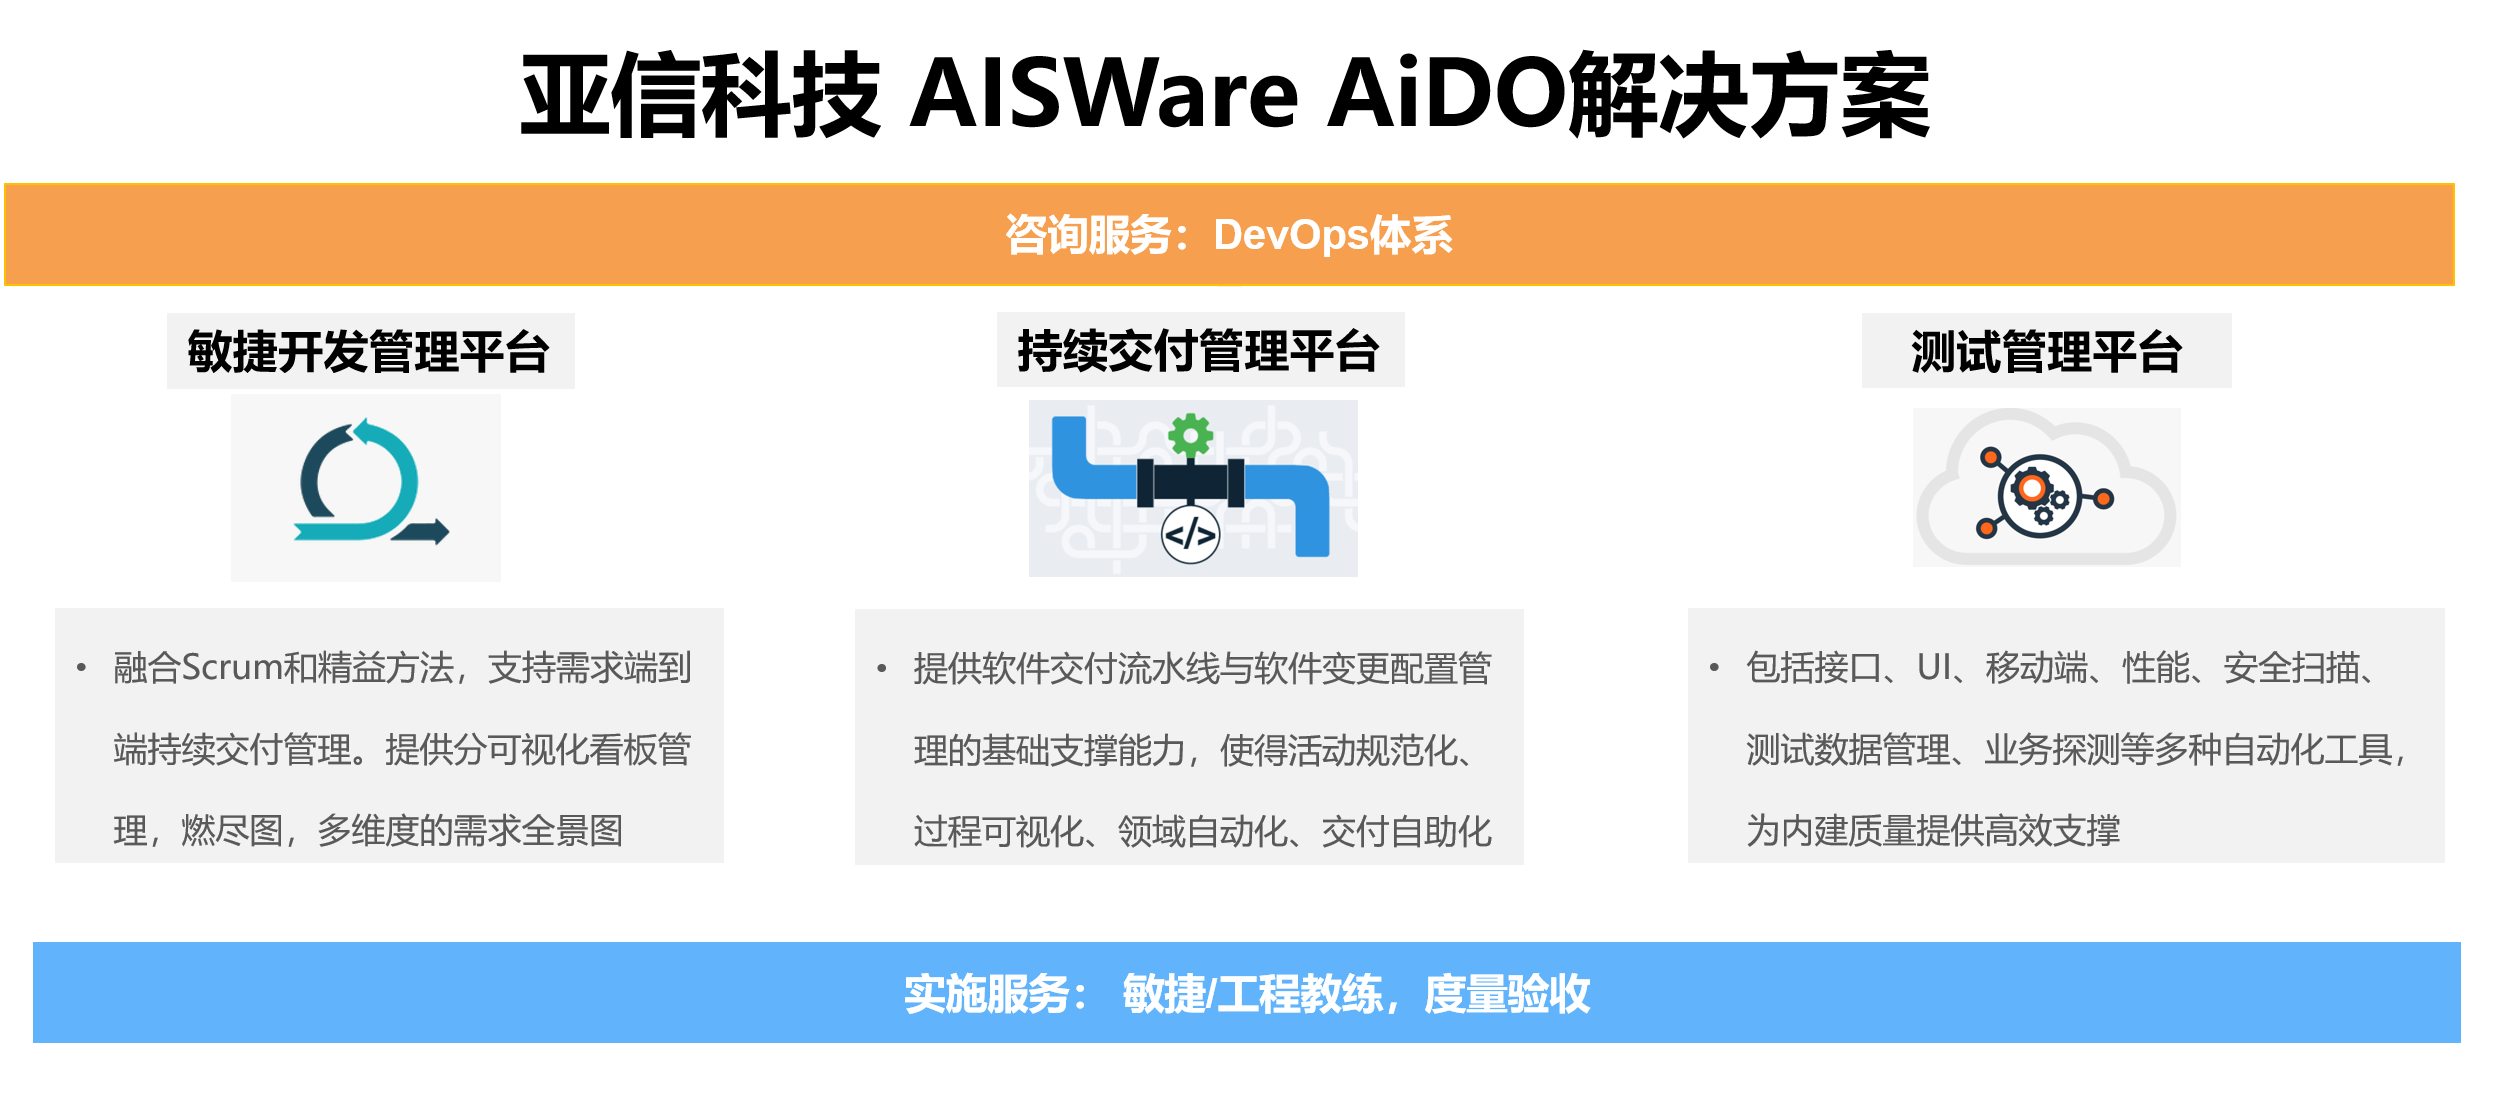 AISWare AiDO解决方案.png